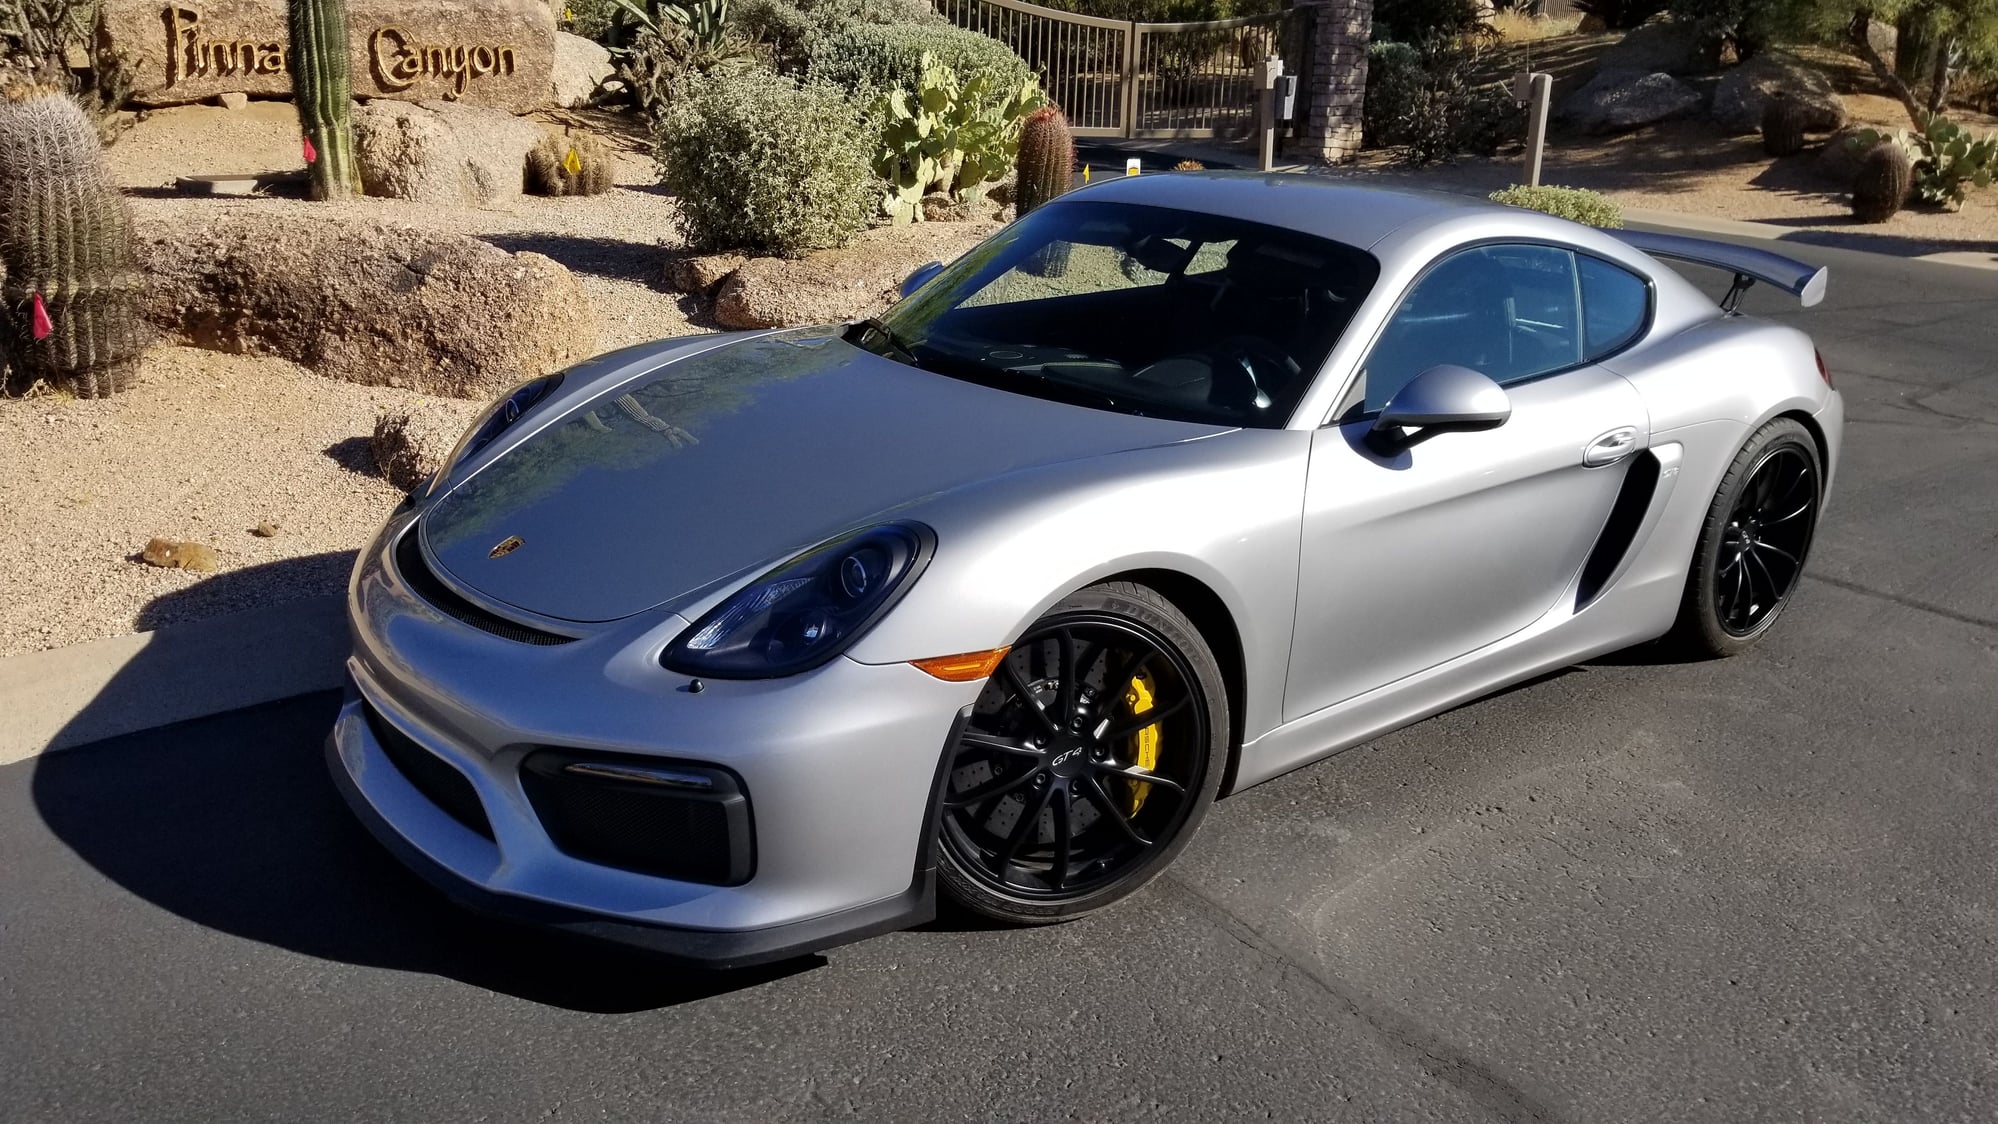 2016 Porsche Cayman GT4 -  - Used - VIN WP0AC2A88GK196220 - 2,765 Miles - 6 cyl - 2WD - Manual - Silver - Chandler, AZ 85224, United States